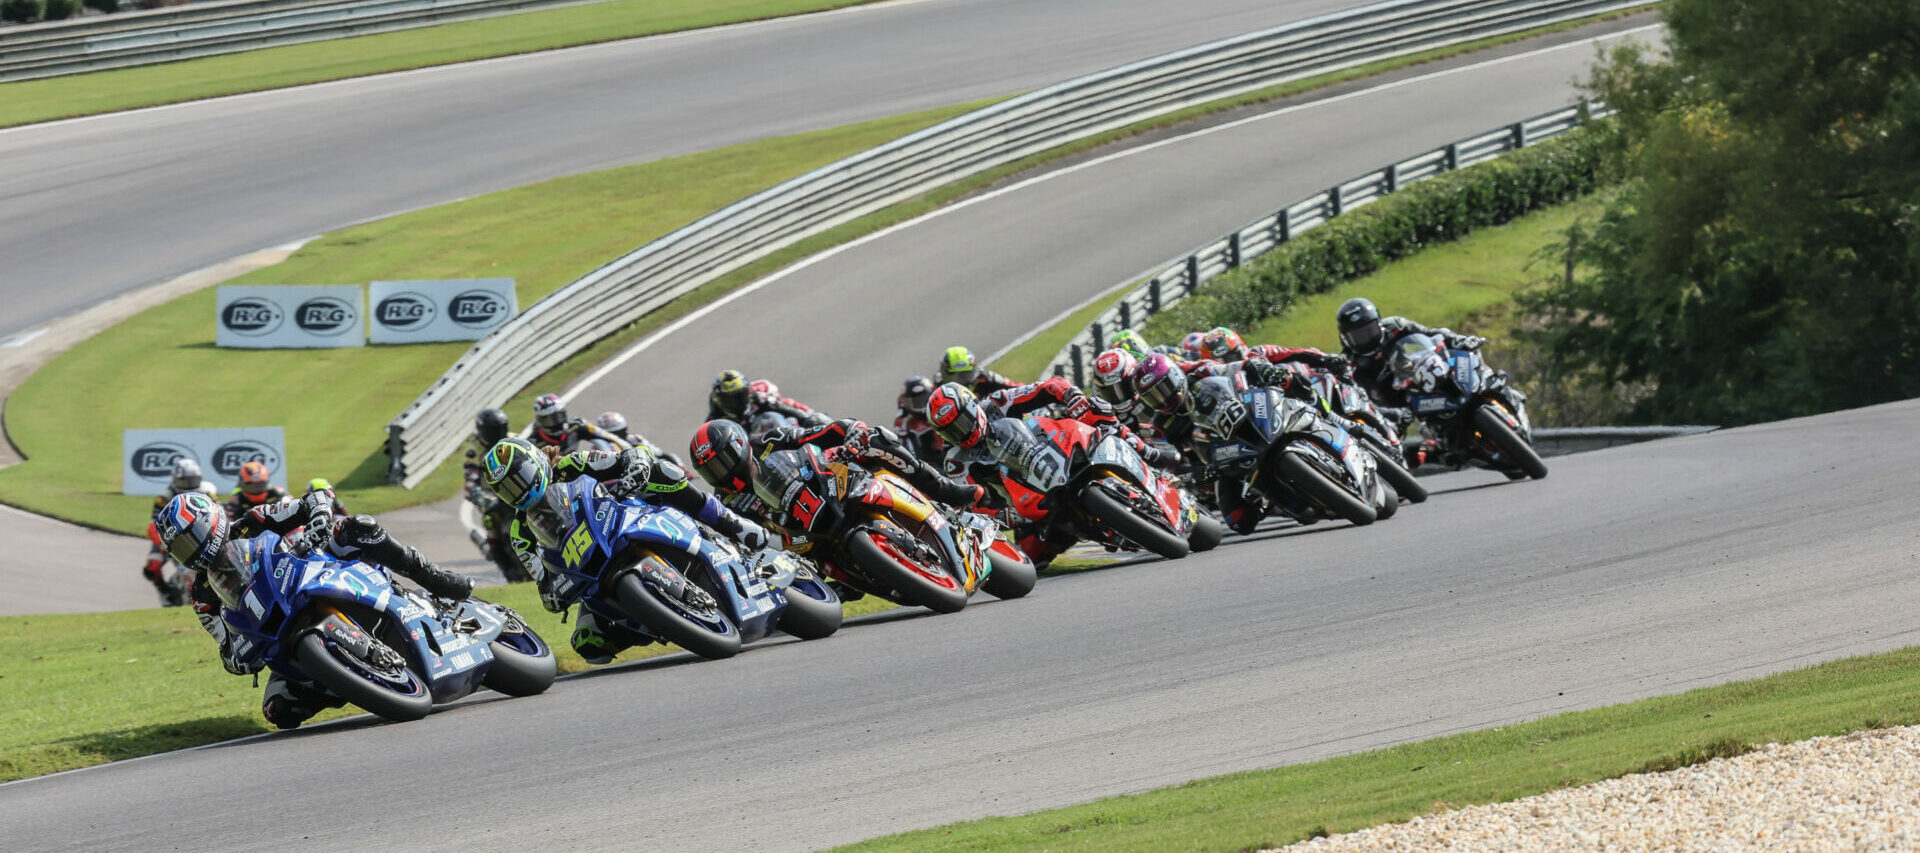 The last place you want dehydration to degrade your decision-making is at the start of a Superbike race on a hot day at Barber Motorsports Park. Photo by Brian J. Nelson.